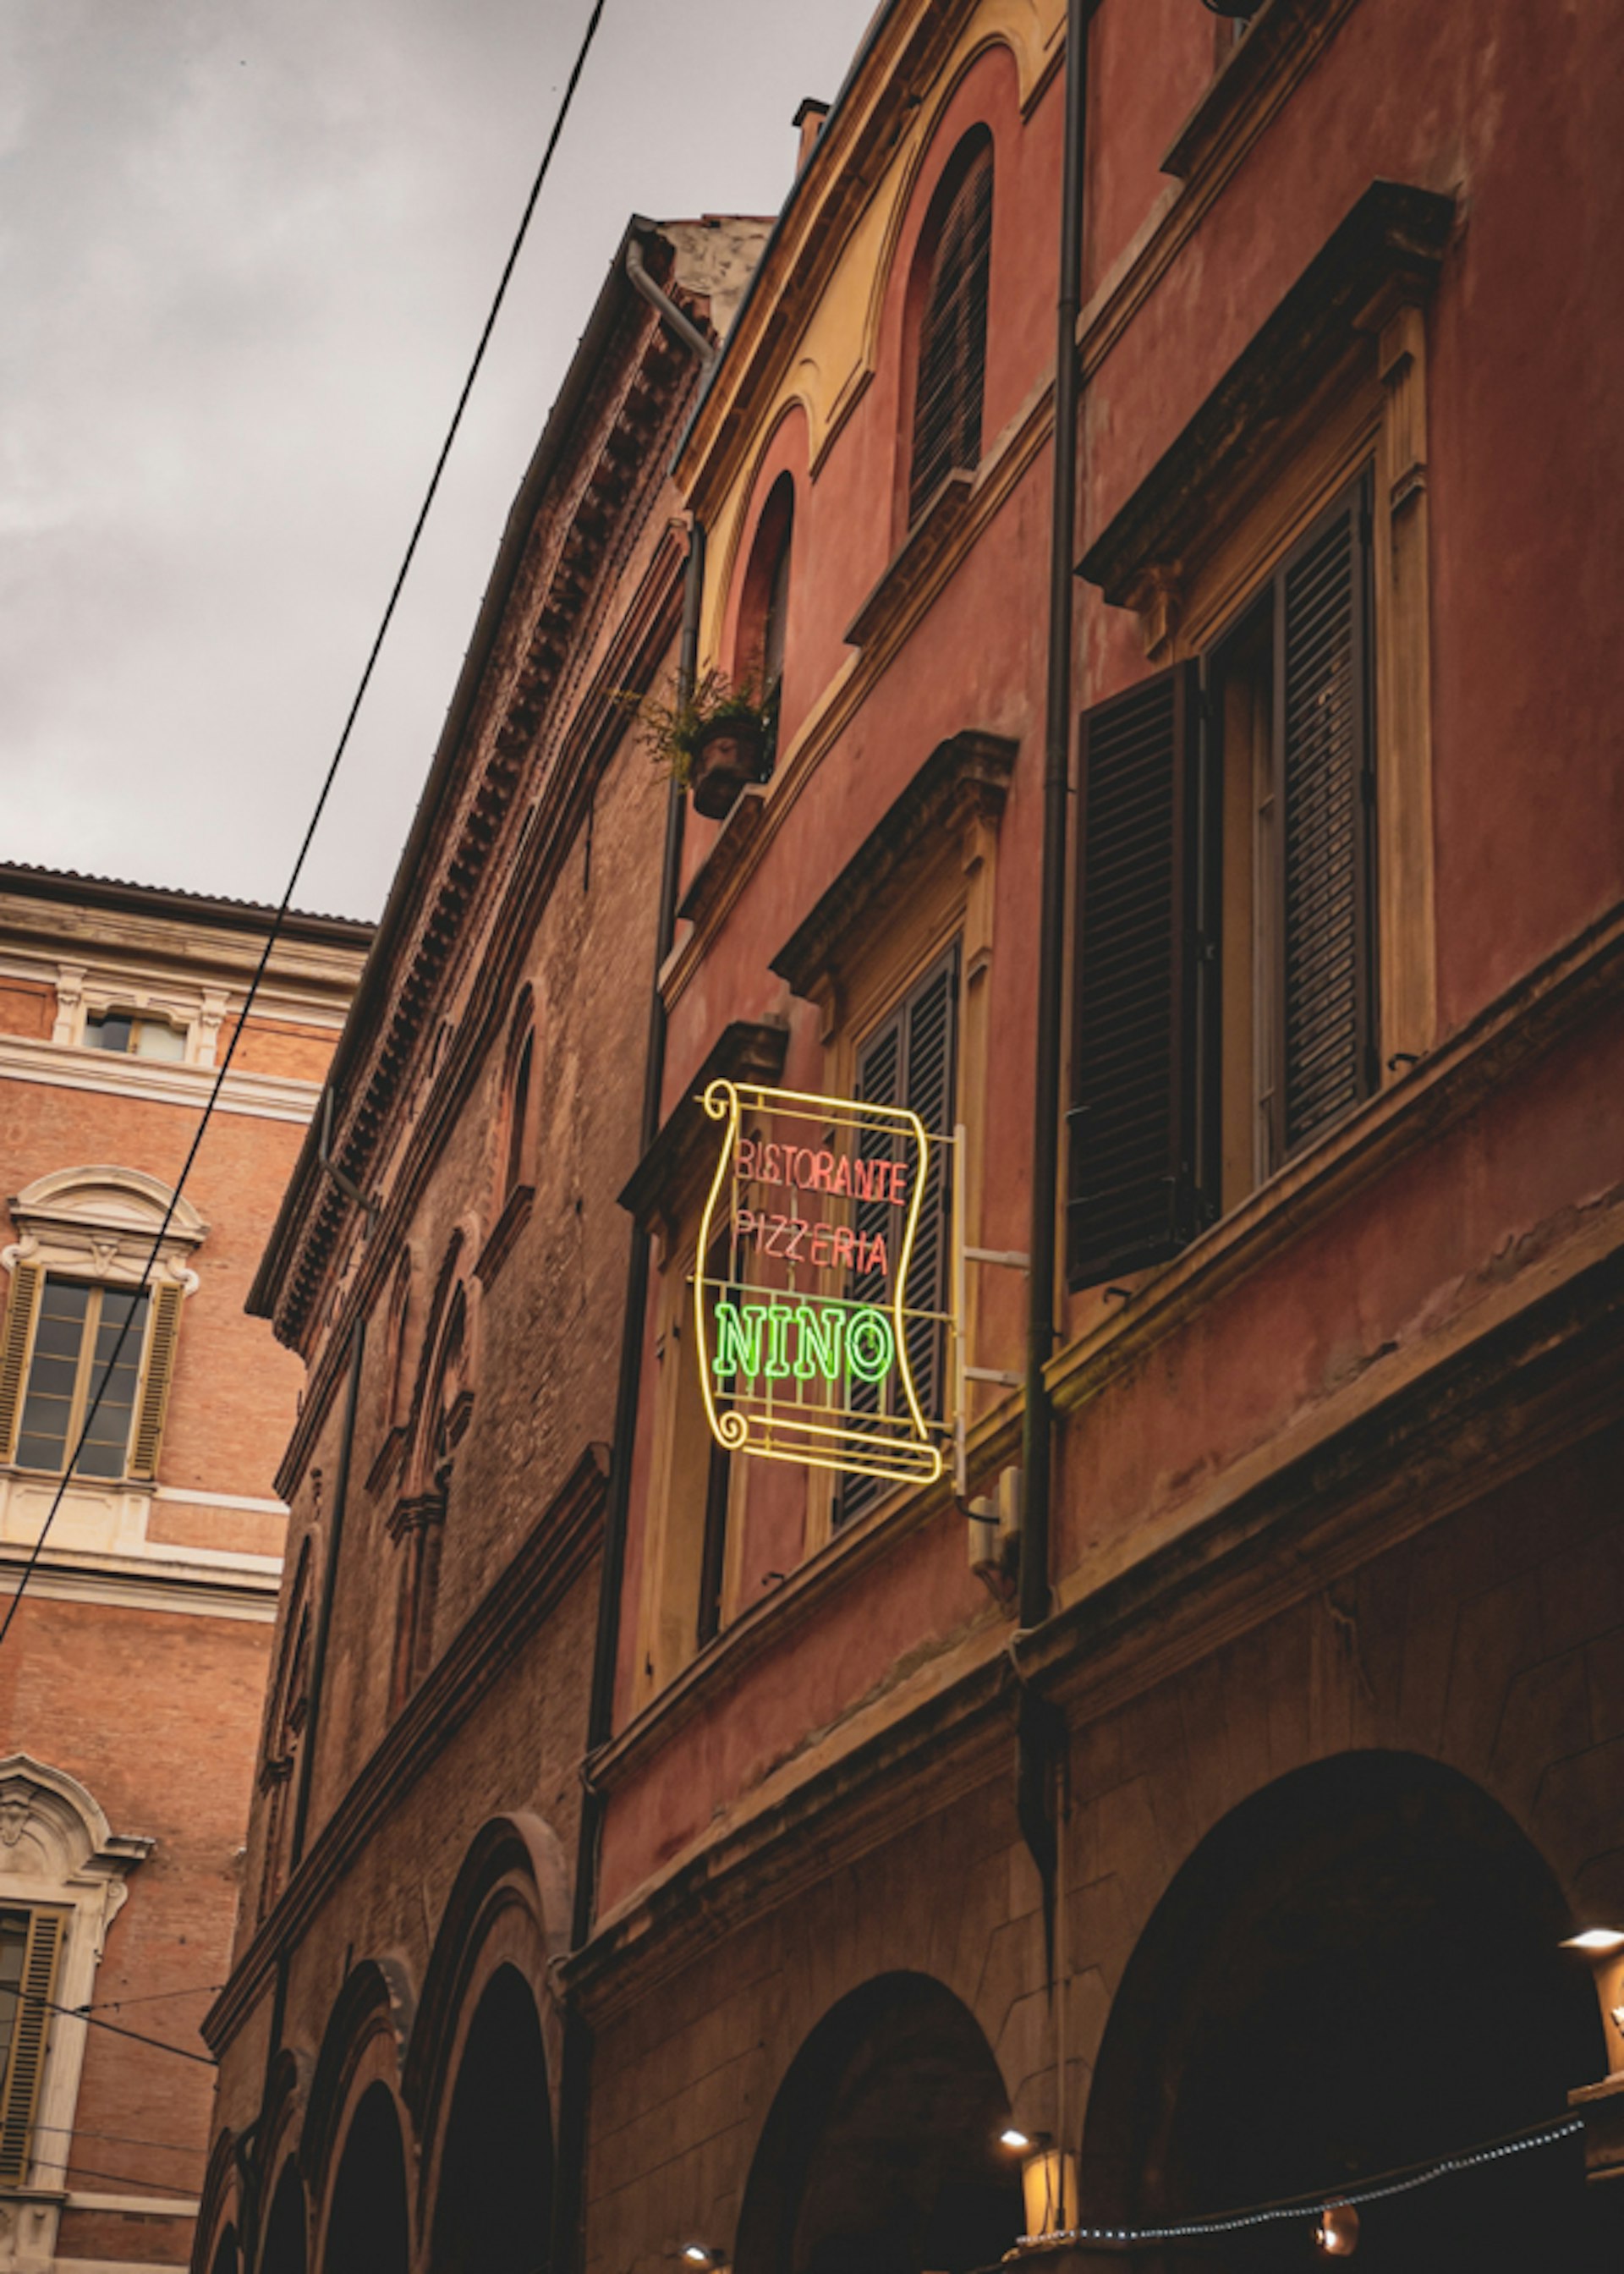 Neon sign of pizza place in Bologna